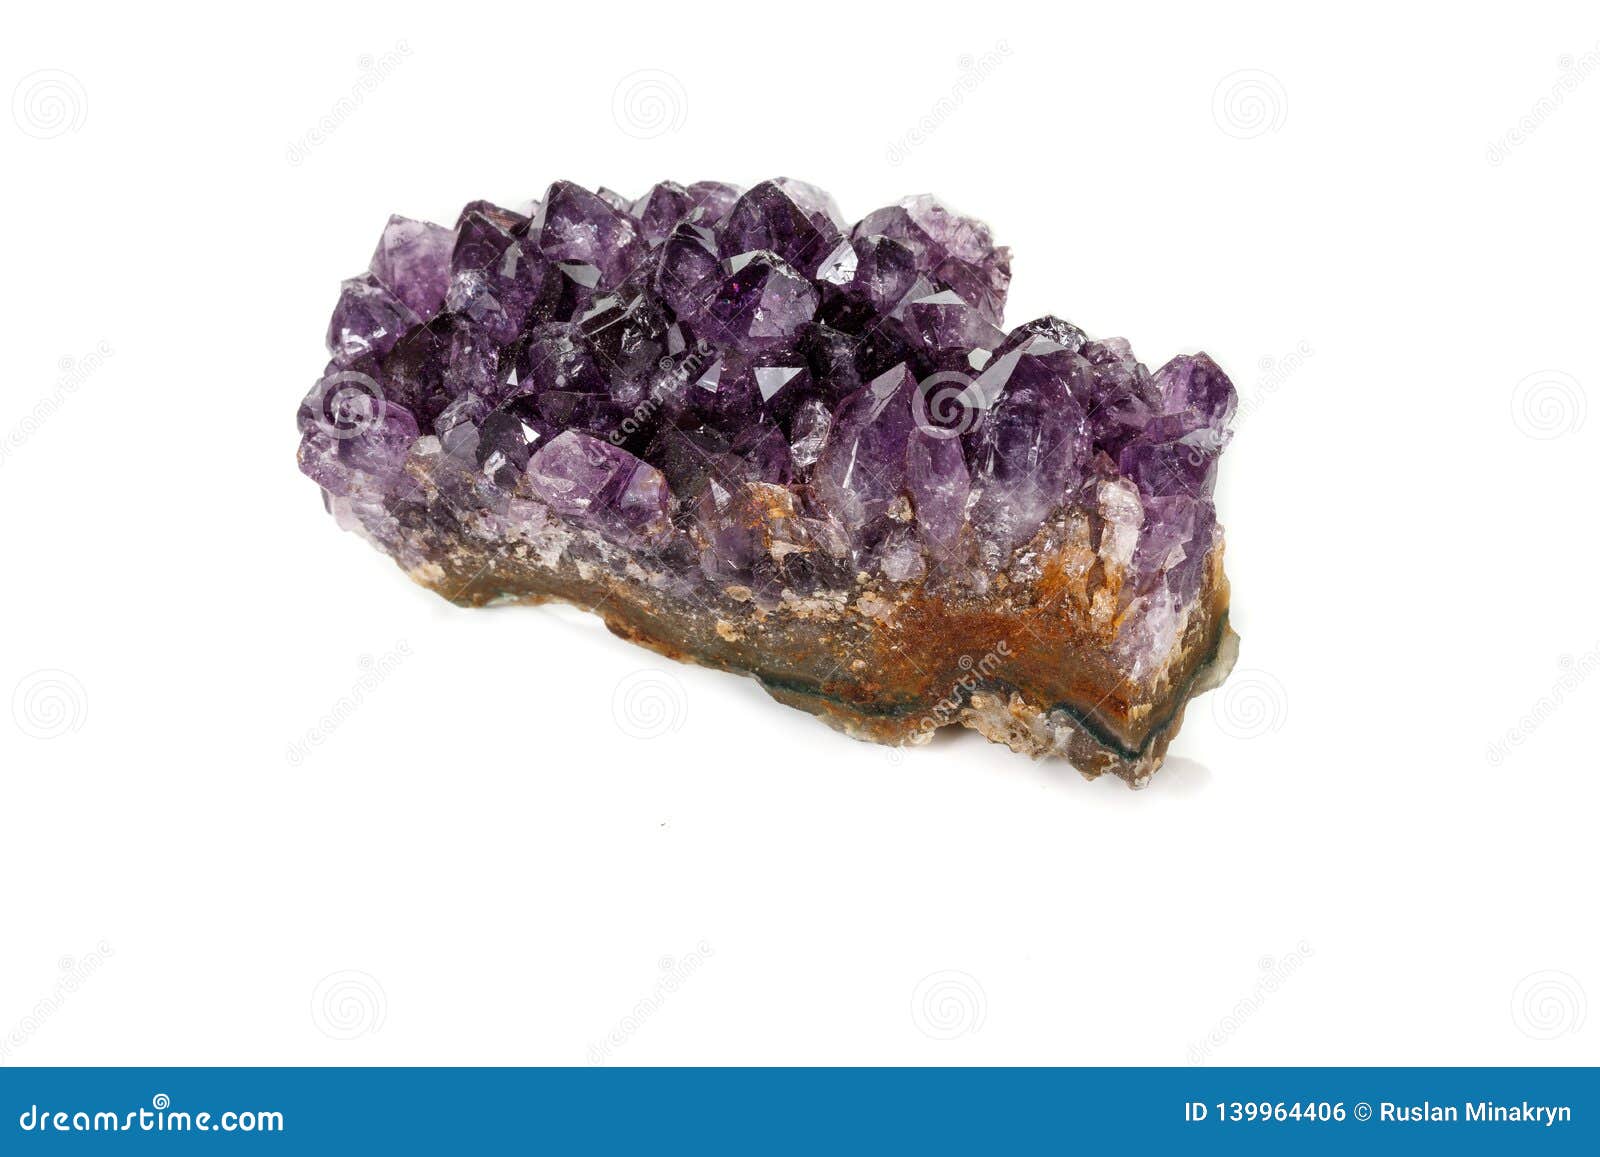 Amethyst Crystal Druse Macro Mineral on White Background Stock Photo ...